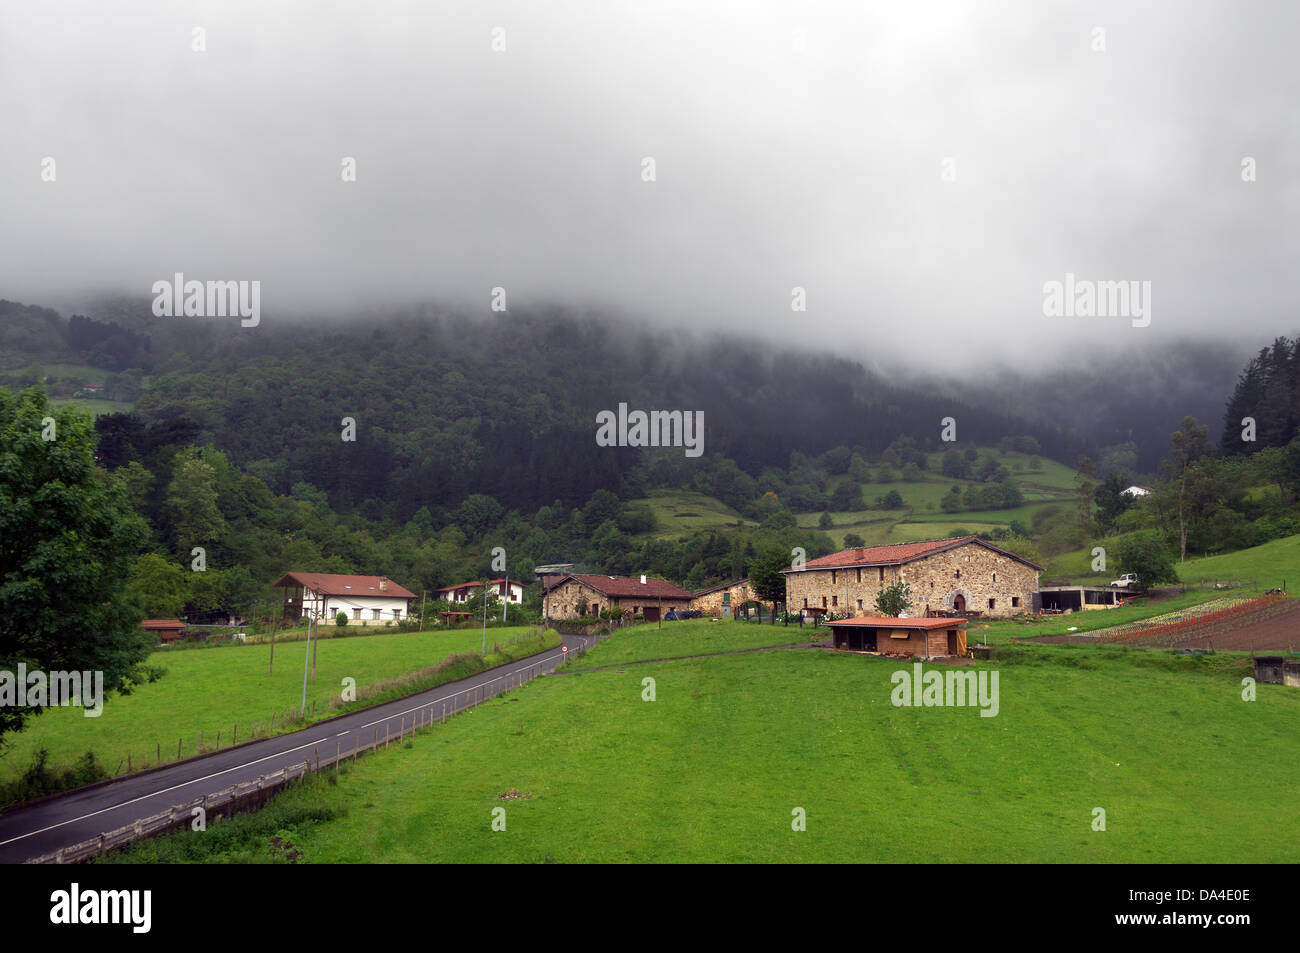 Basque country village with typically basque houses and rainy weather. Taken in Axpe, Atxondo, Basque Country, Spain Stock Photo